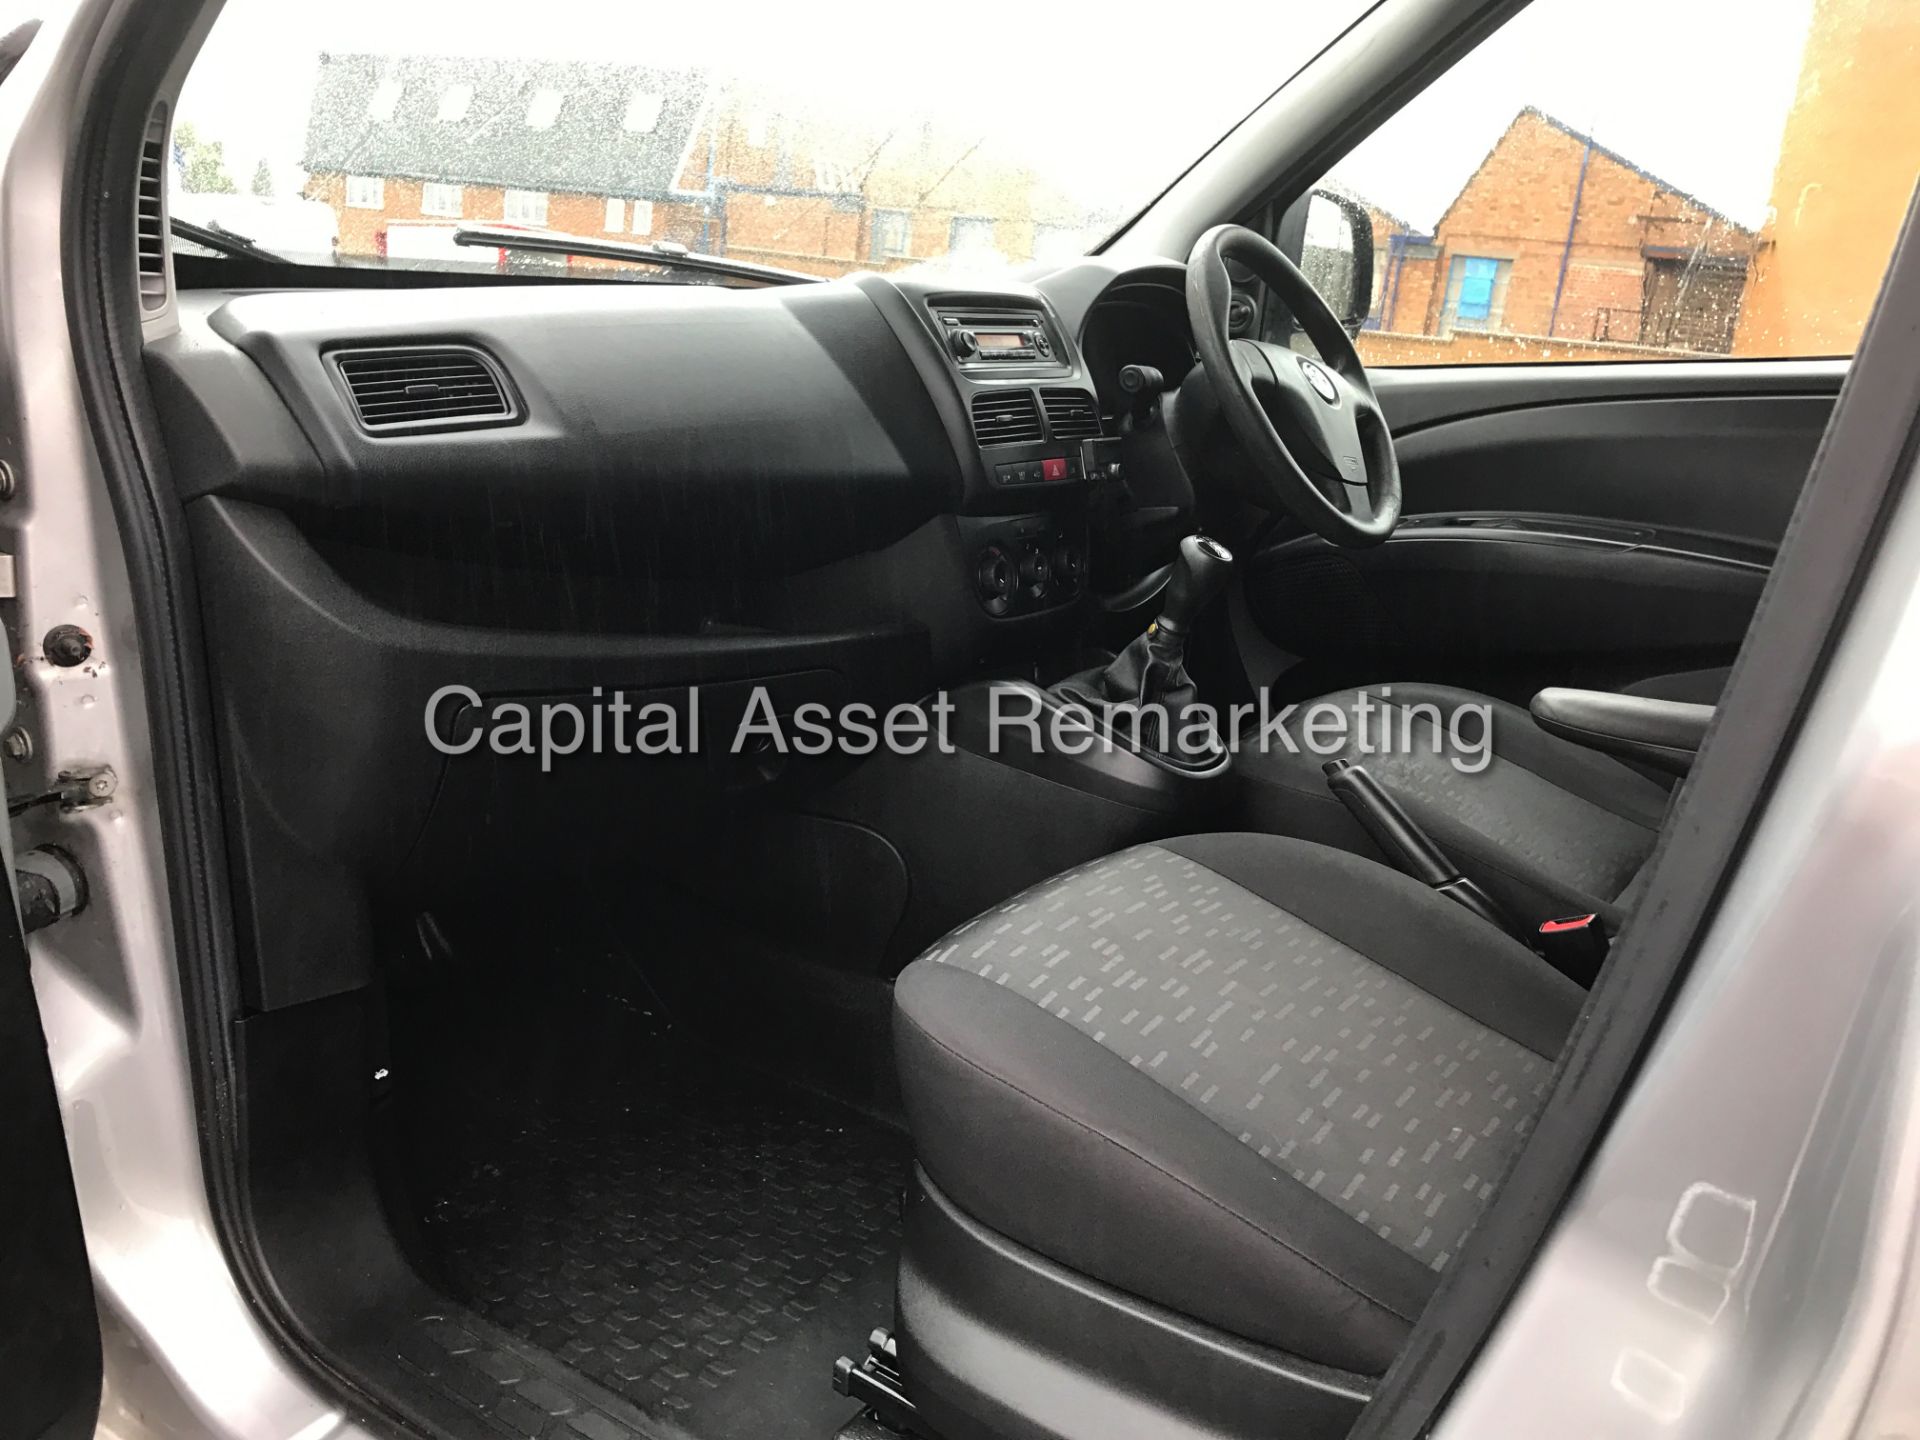 On Sale VAUXHALL COMBO 1.3CDTI "SPORTIVE - 90BHP" 1 OWNER (2013 MODEL) AIR CON - ELEC PACK - Wow!!!! - Image 13 of 15